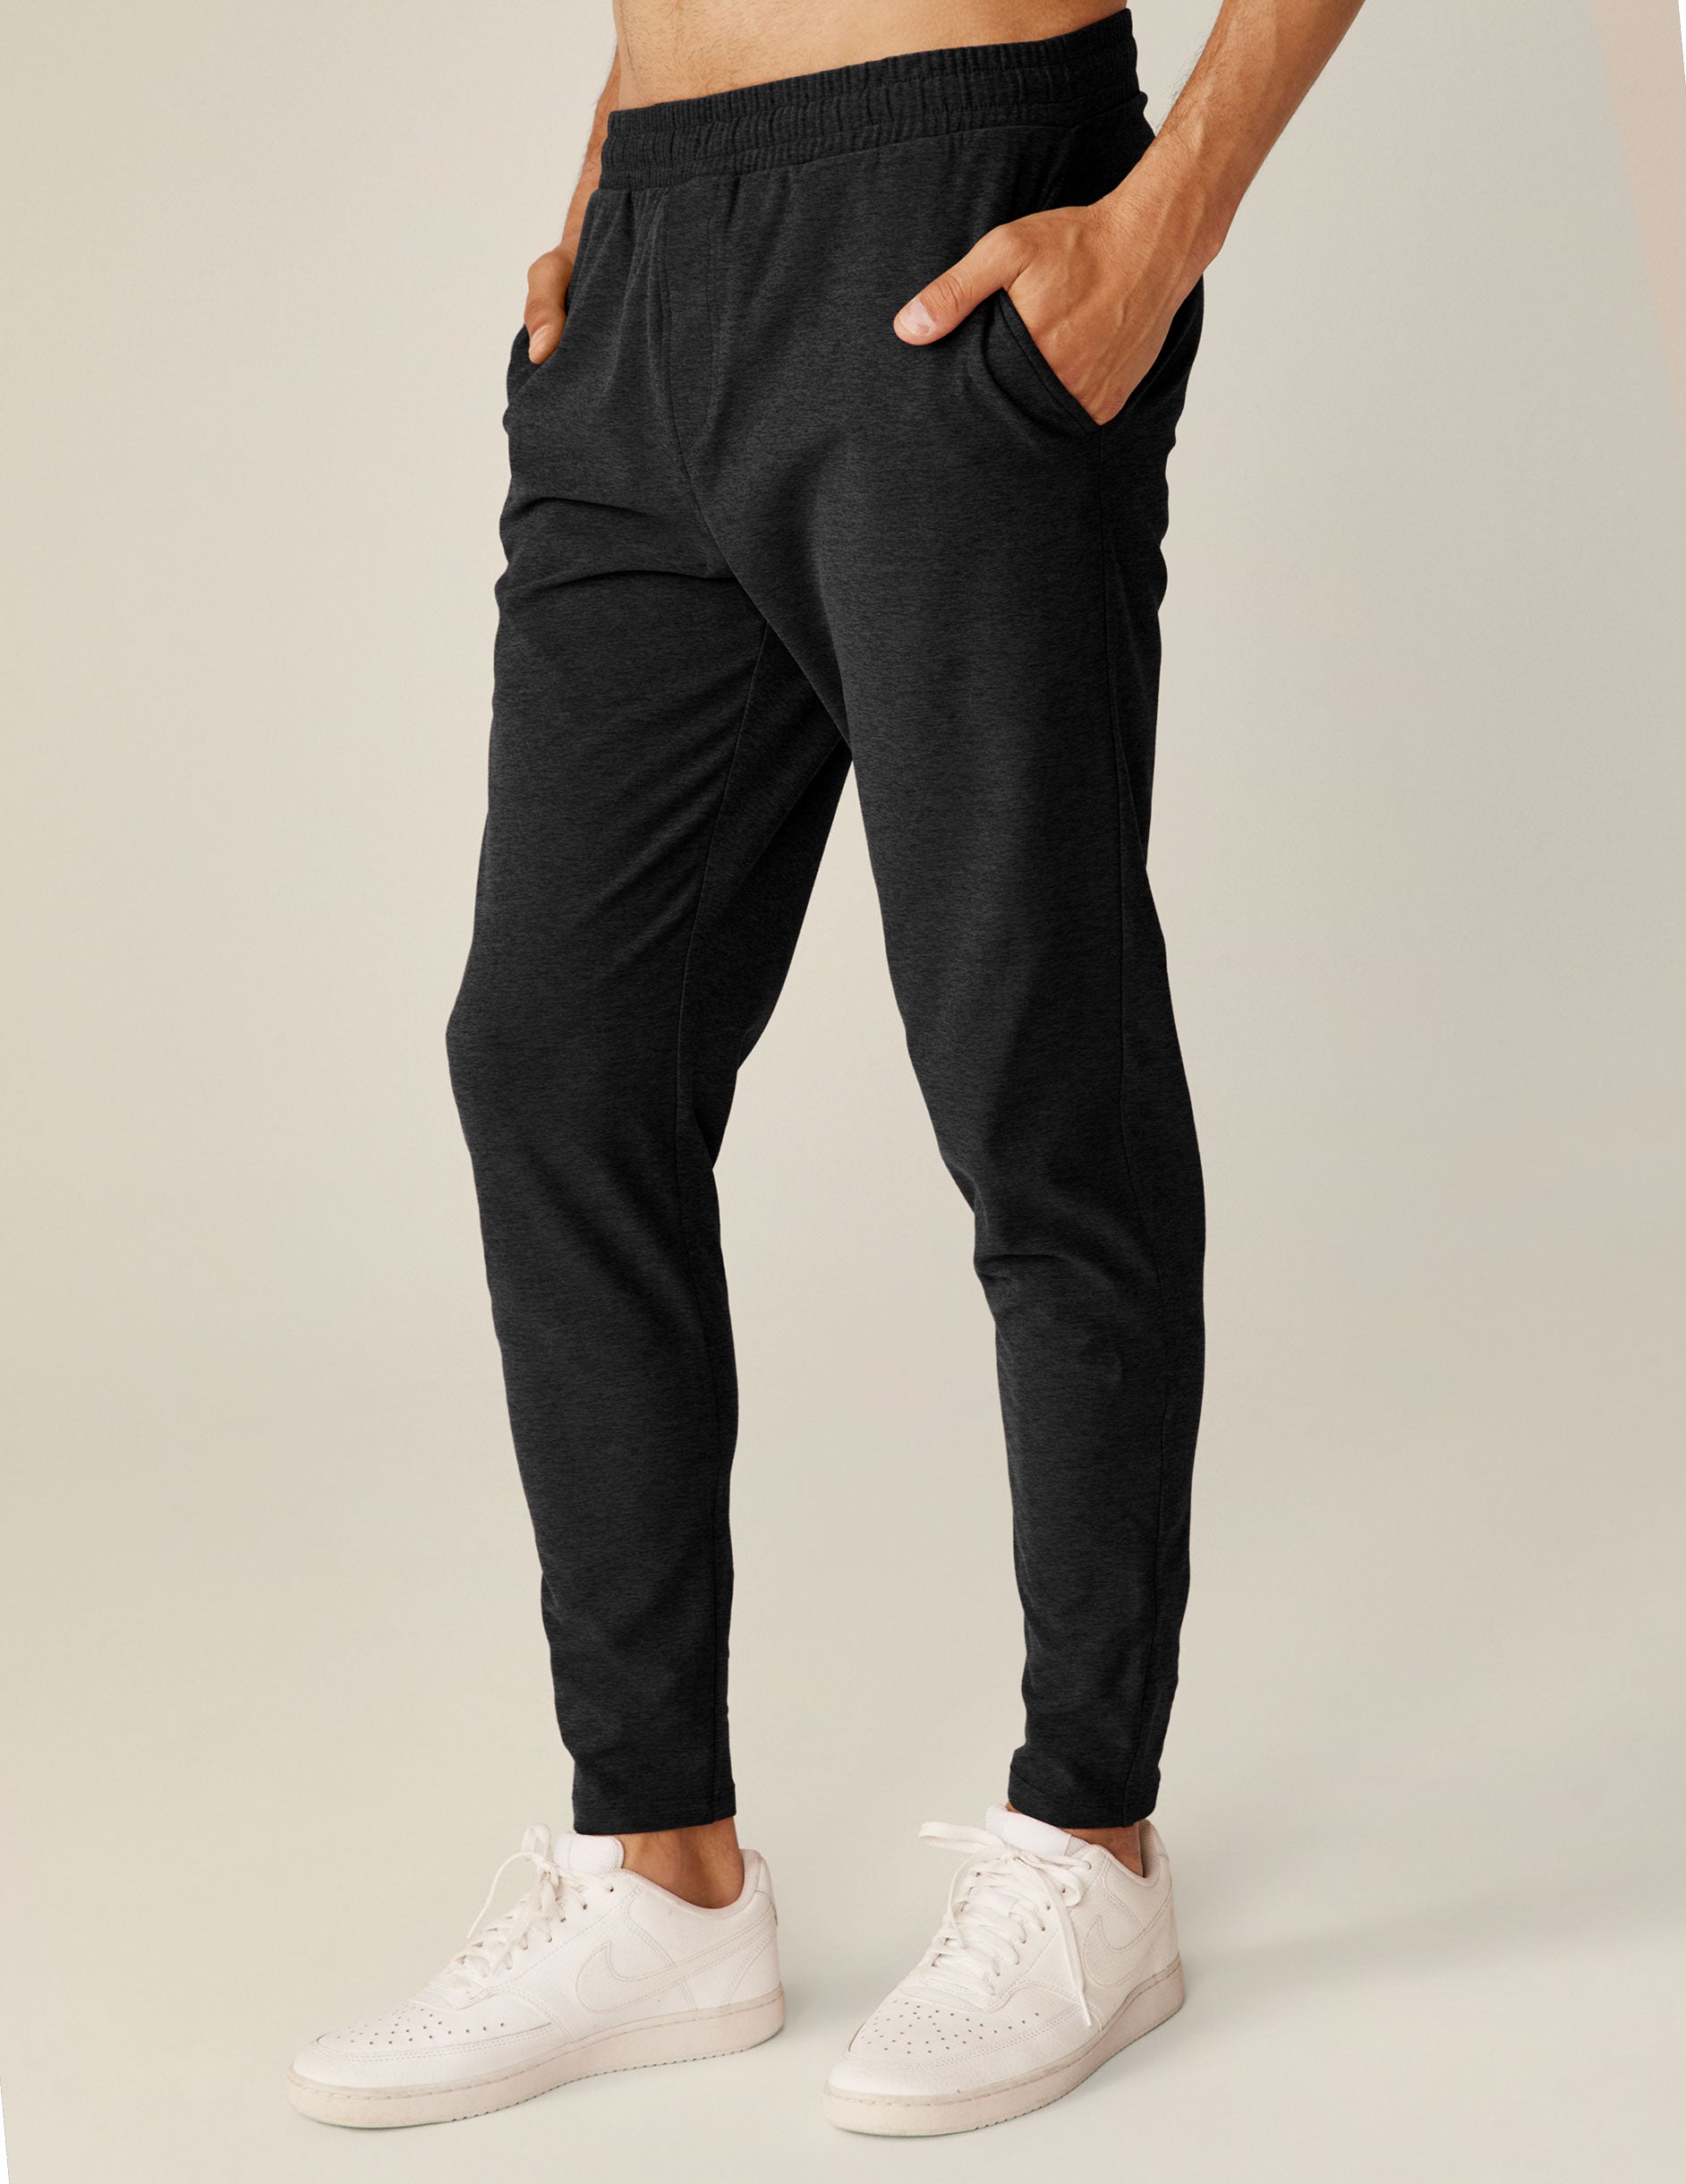 black men's athleisure pants with an internal drawcord and pockets.